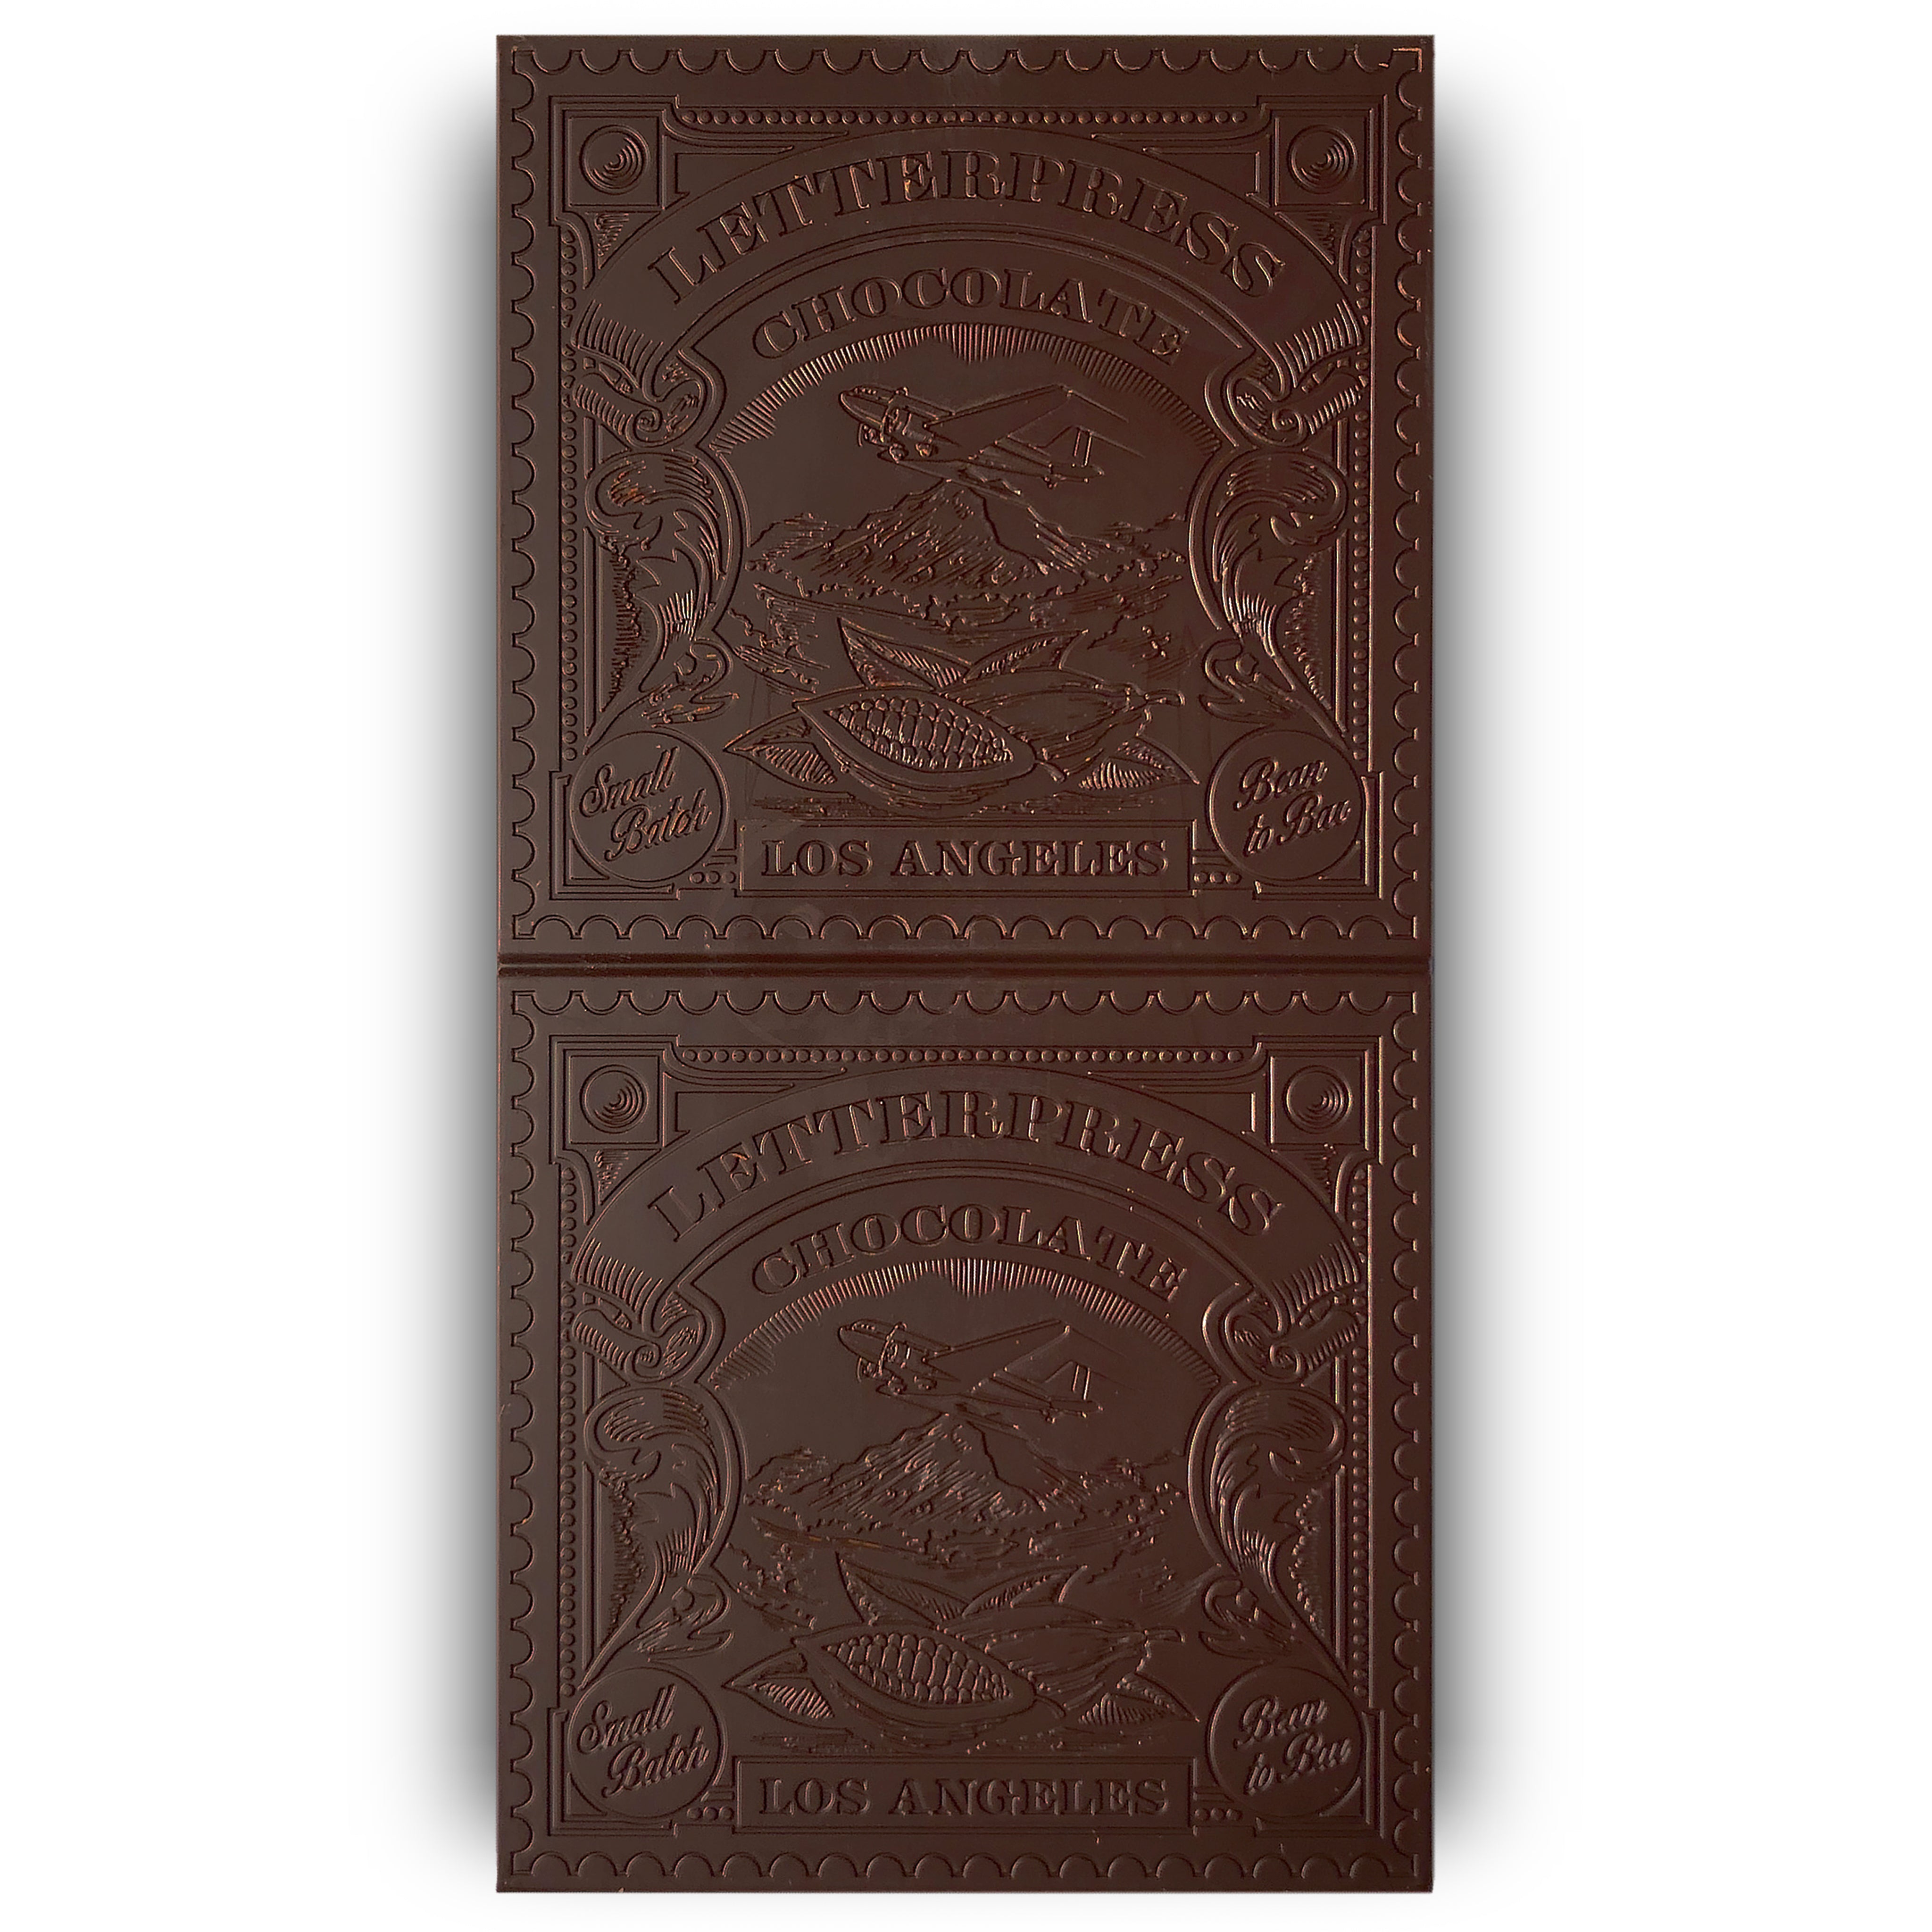 Sao Tome Limited Edition 70% Dark Chocolate on a white background